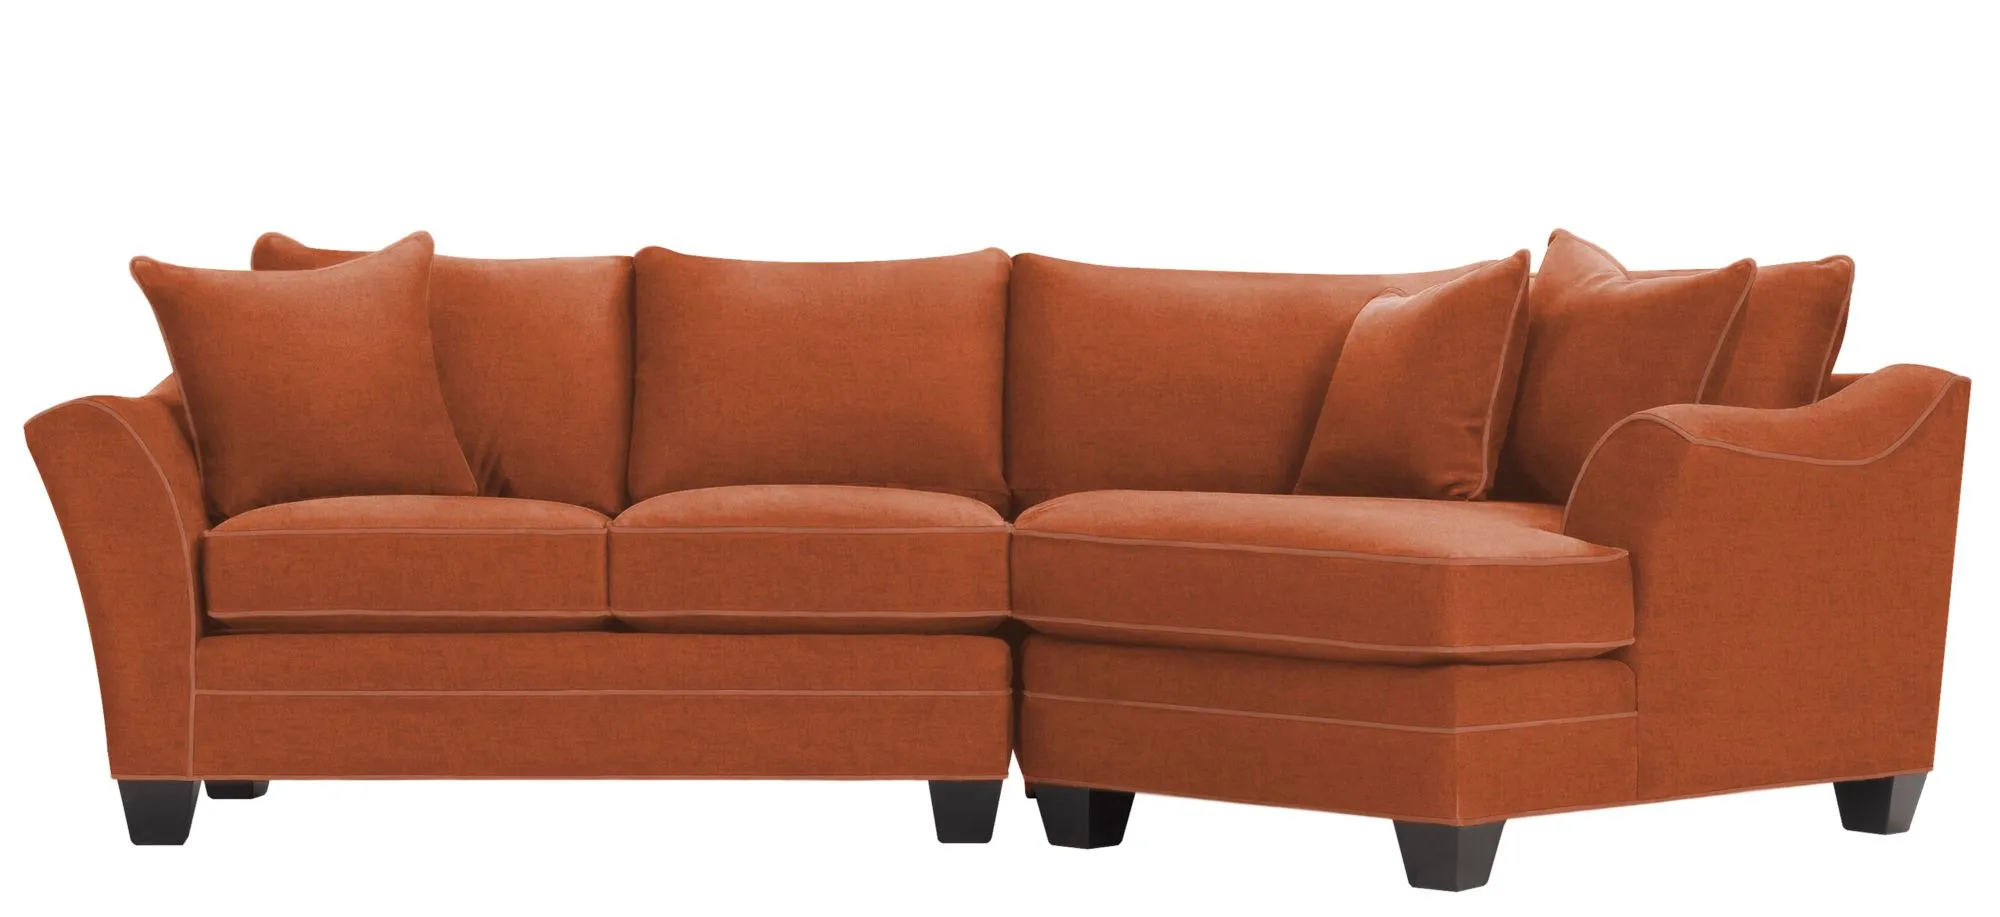 Foresthill 2-pc. Right Hand Cuddler Sectional Sofa in Santa Rosa Adobe by H.M. Richards